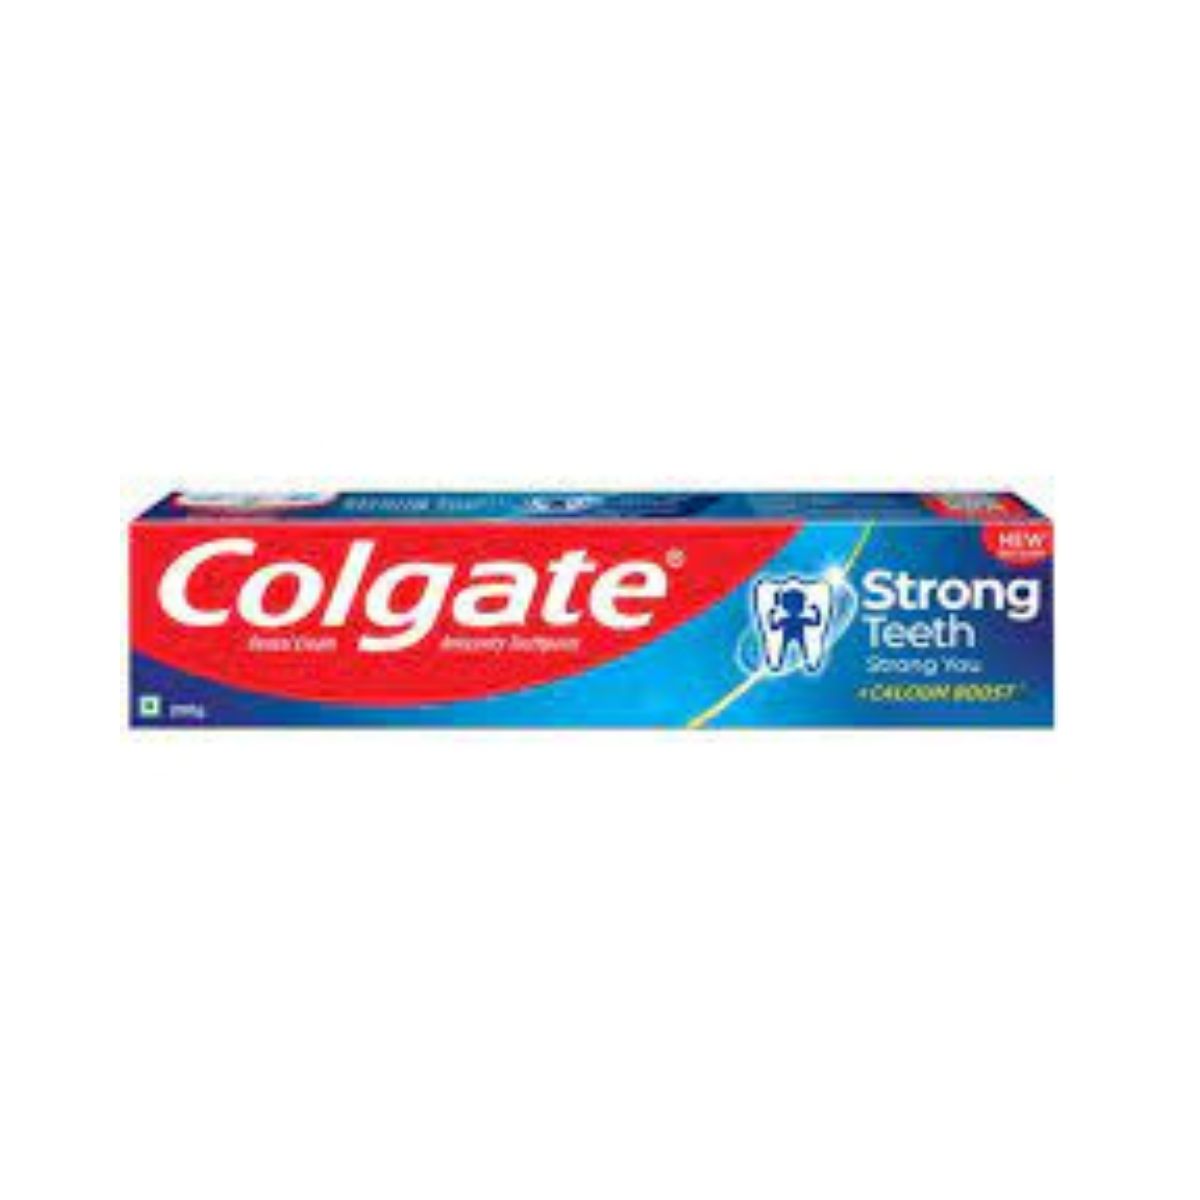 Colgate Dental Cream Anticavity Toothpaste - Strong Teeth Strong You - 200g